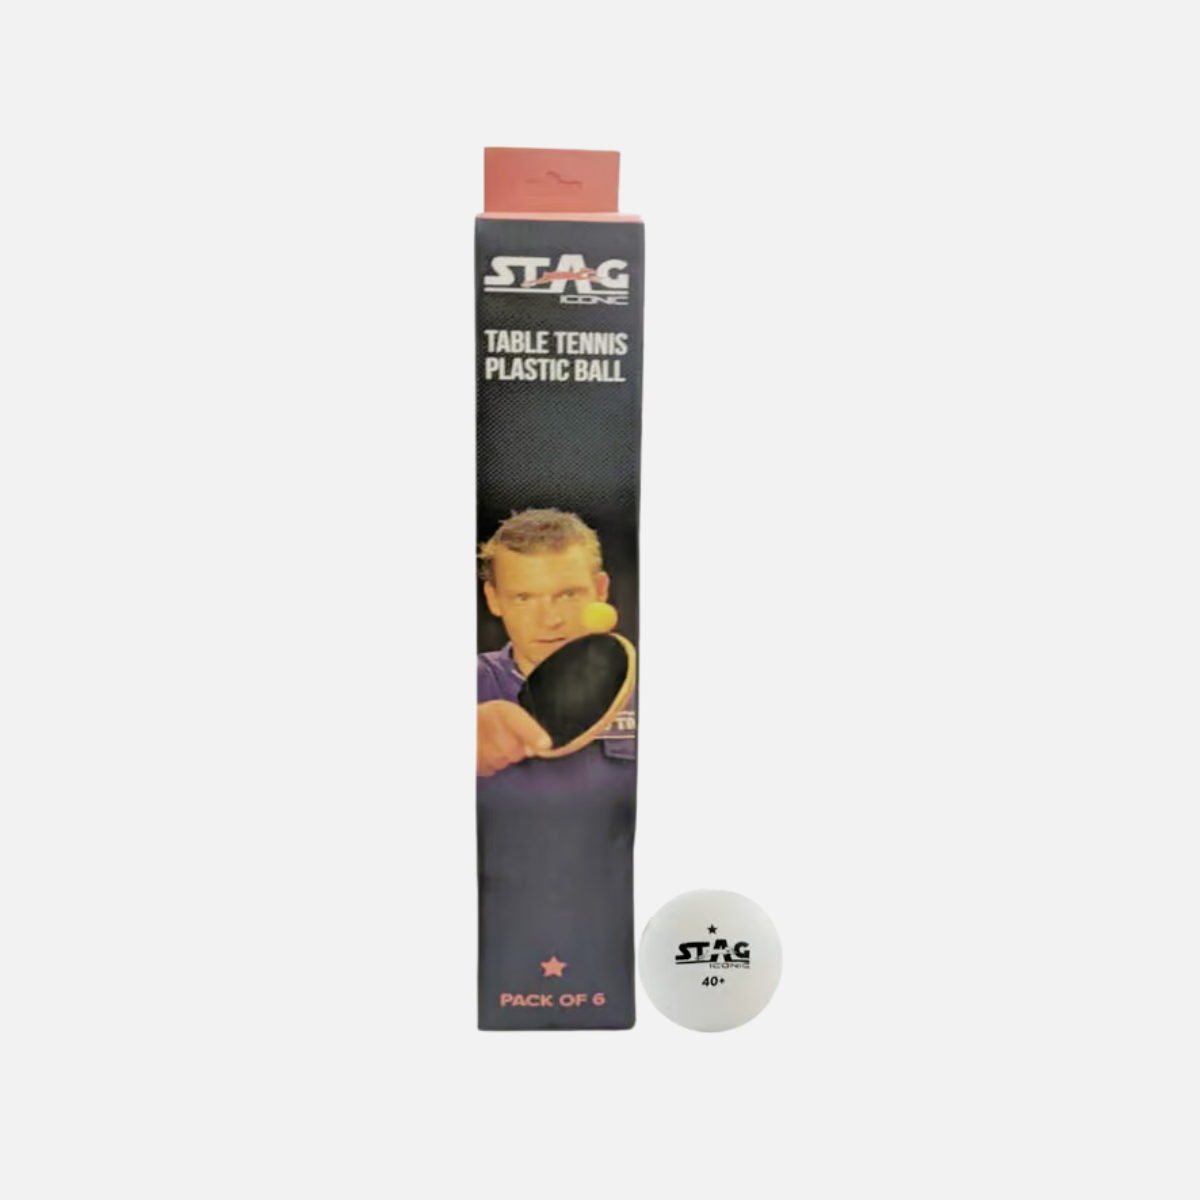 Stag 1 star 40+Table Tennis Ball Pack of 6 -White